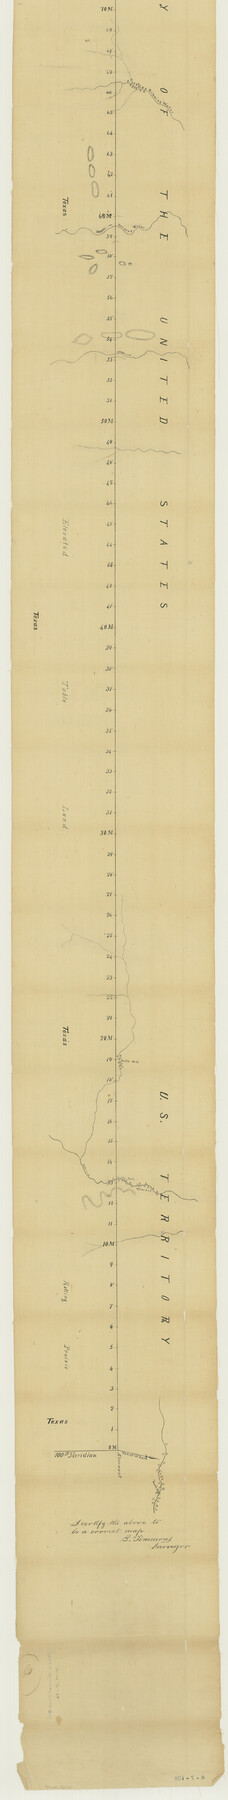 3084, Map of the Survey of the Parallel 36 1/2 Degrees North Latitude, Commencing at the 100th and Running to the 103rd Degree of Longitude West of Greenwich, General Map Collection